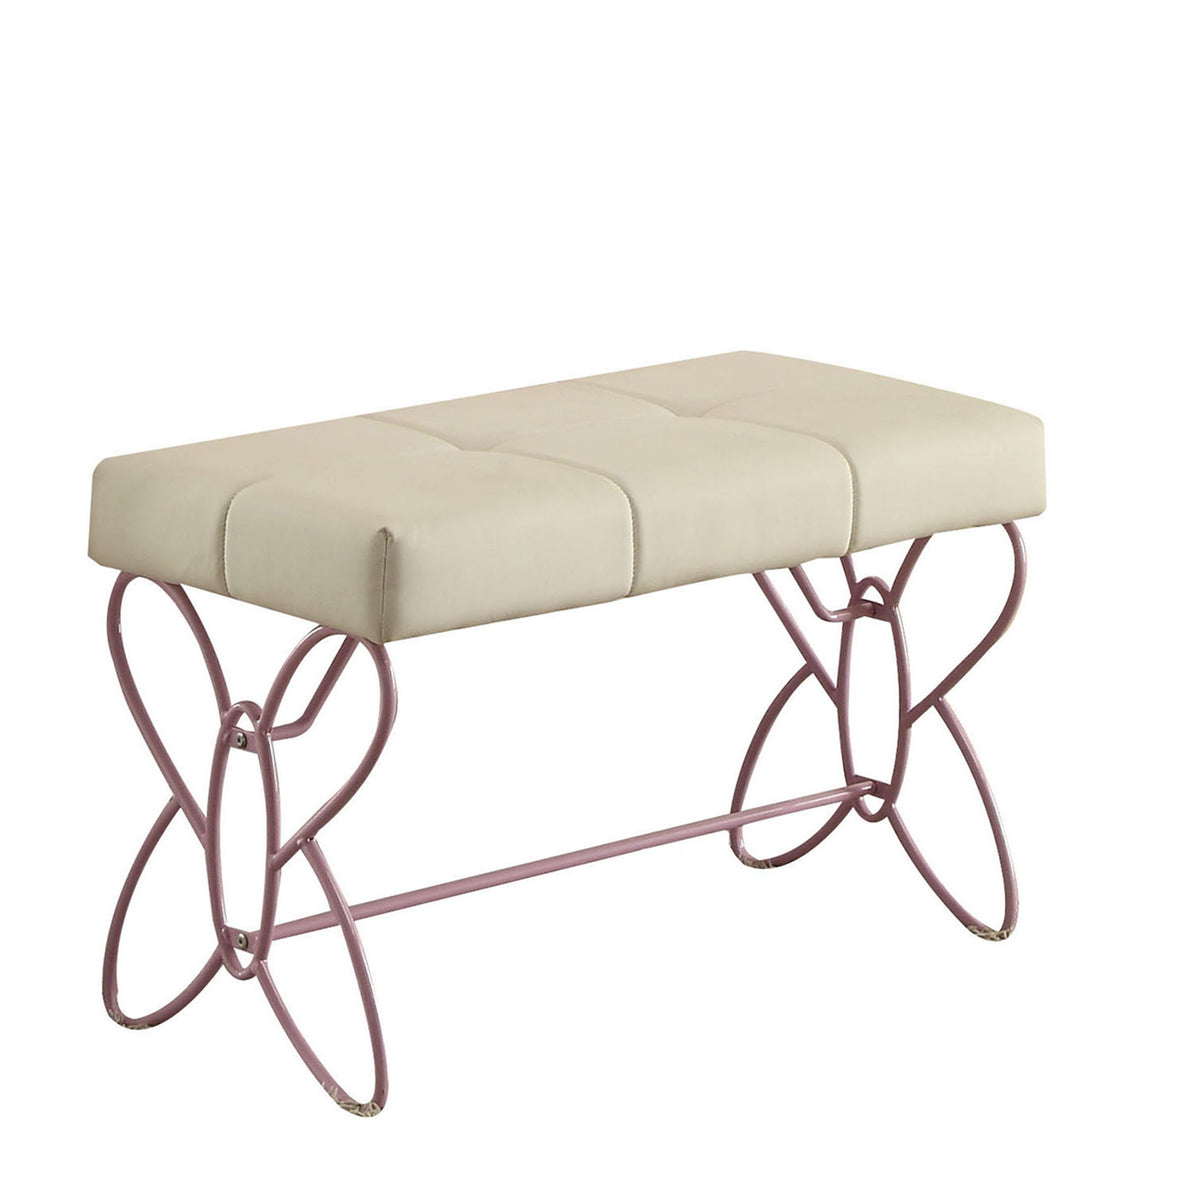 Metal Armless Bench with Butterfly Design, White and Purple - BM204310